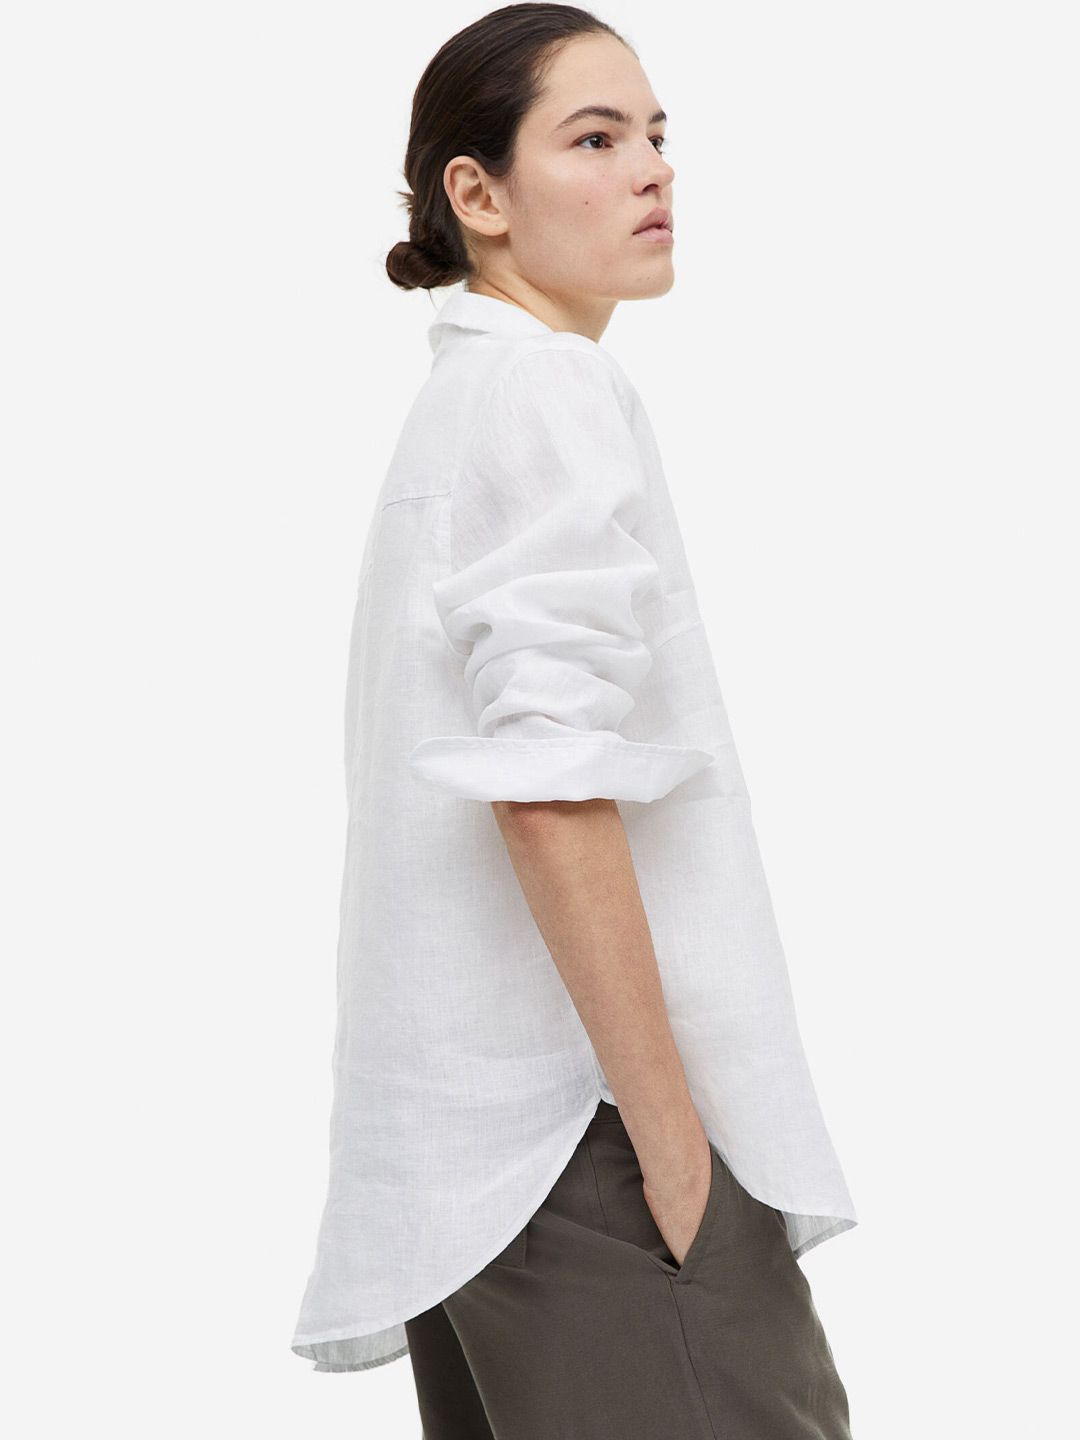 H&M Pure Linen Shirts Price in India